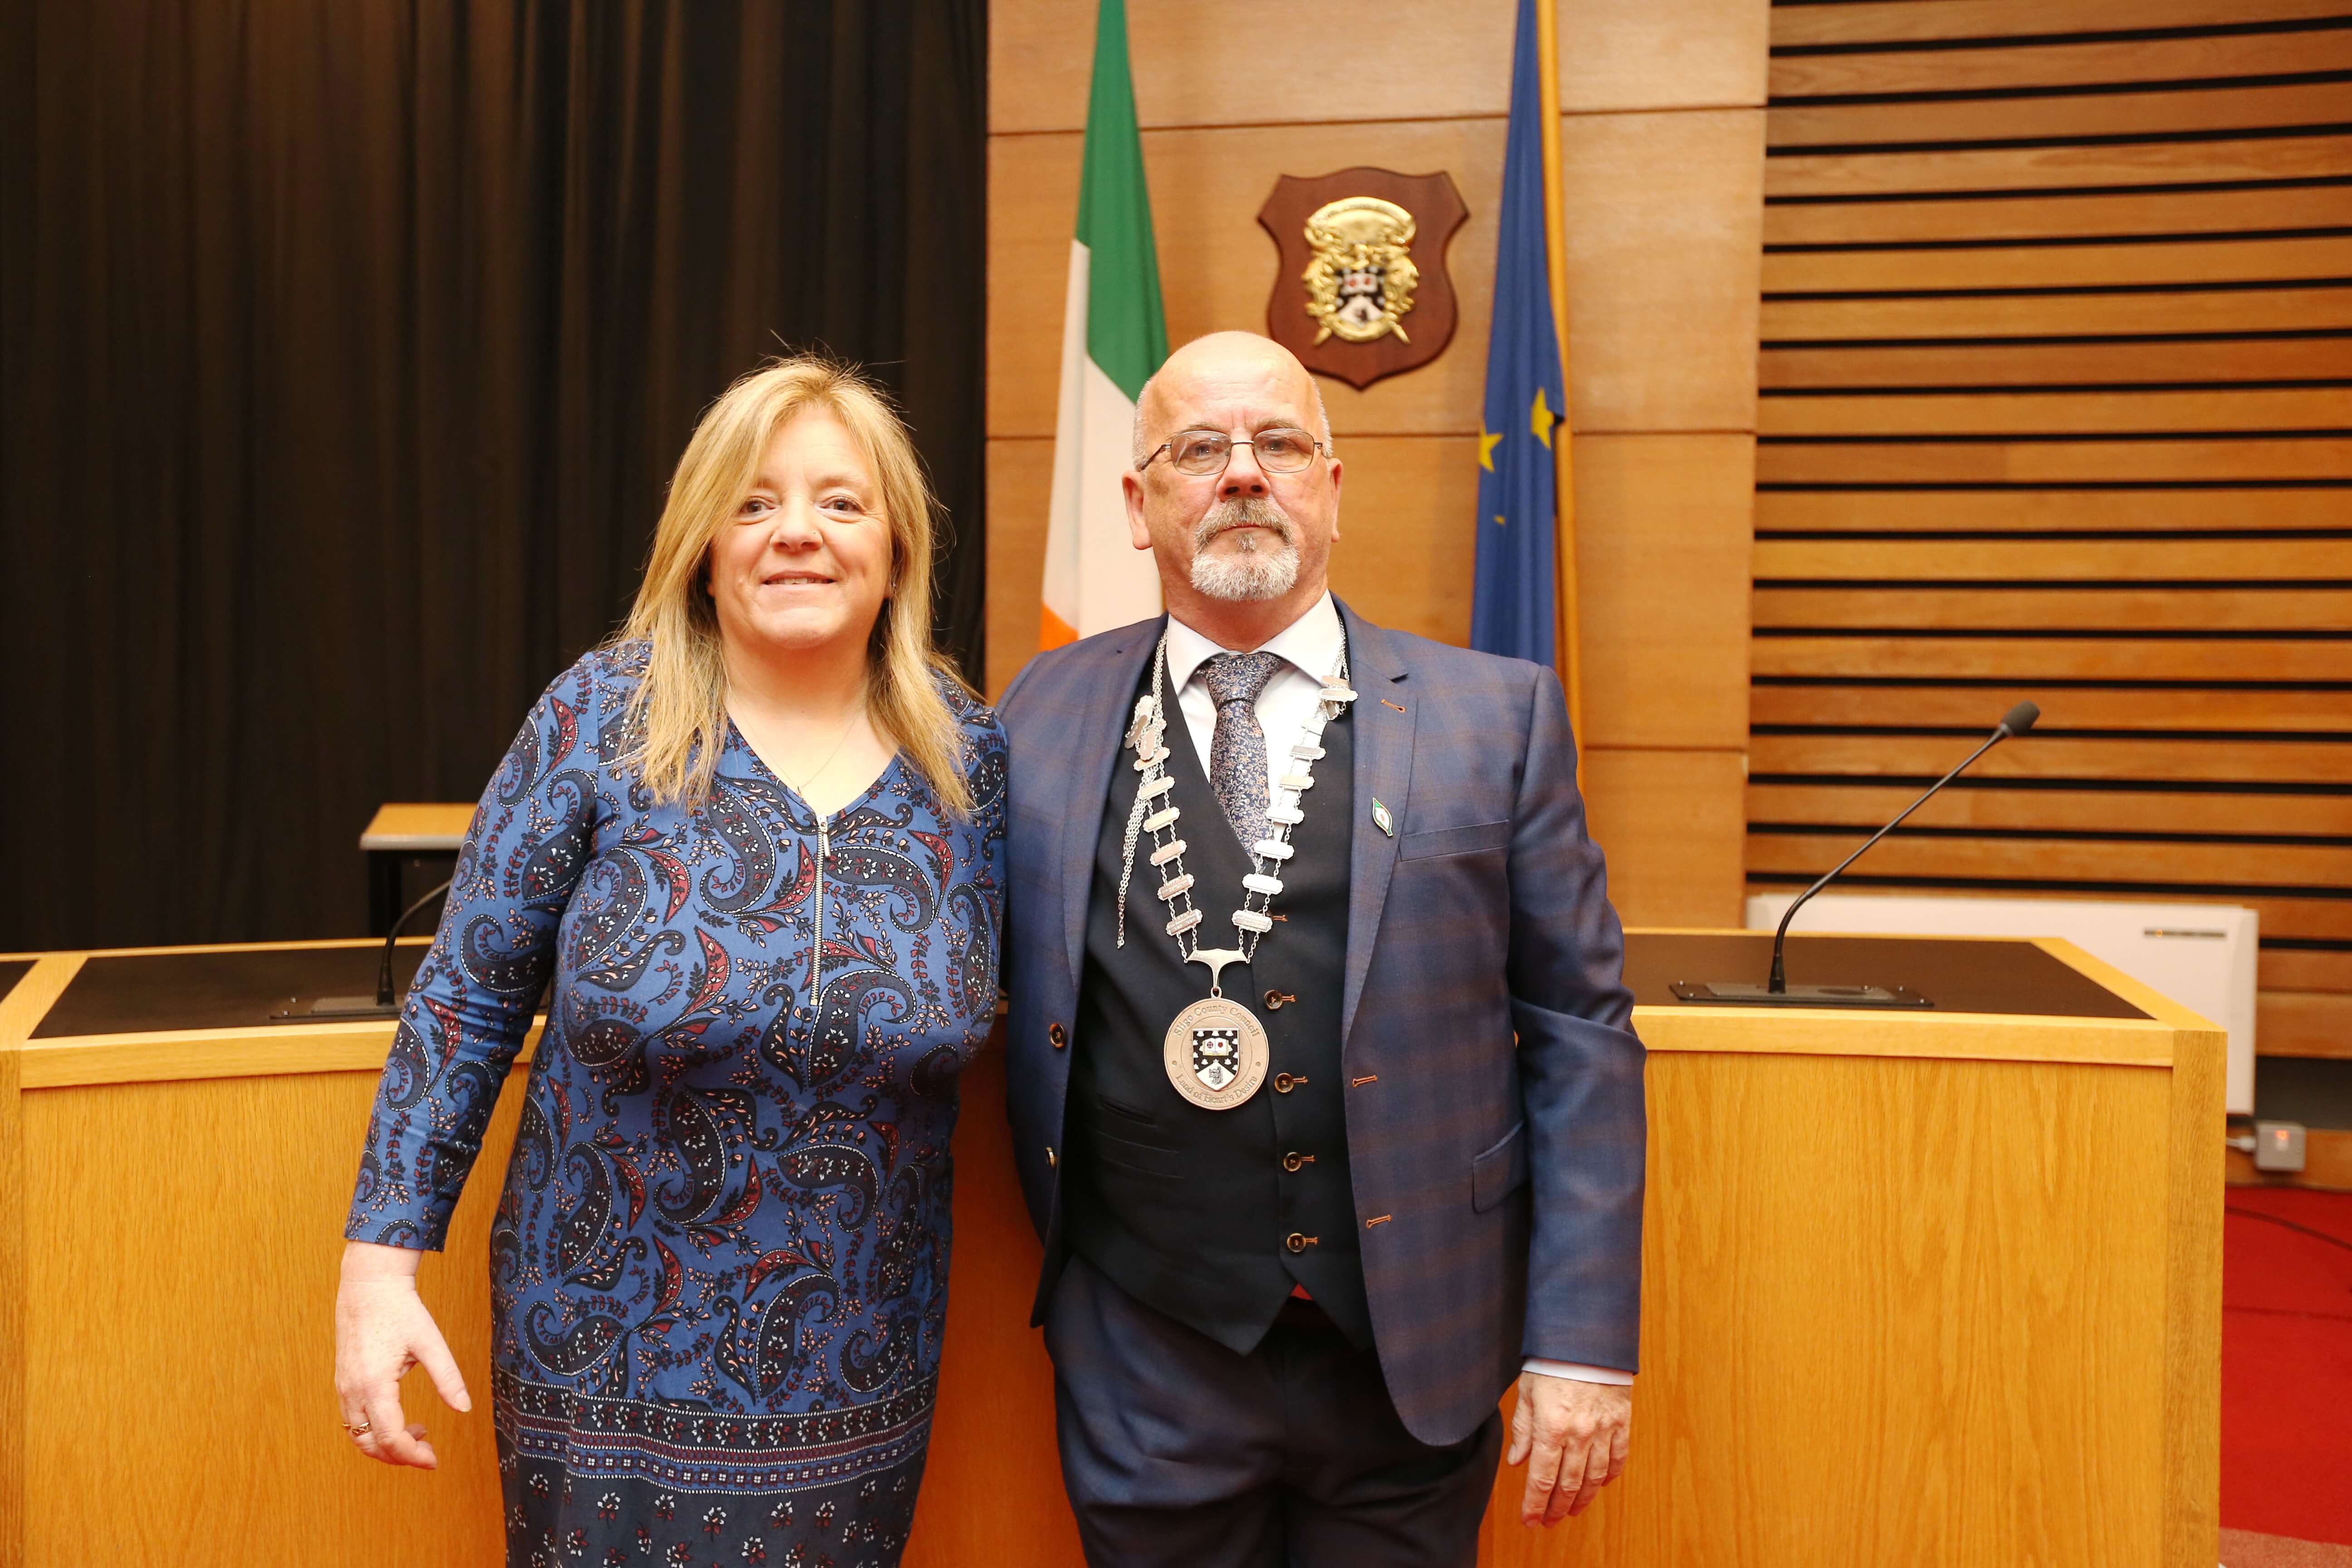 Mayor Gibbons and his wife Celene 